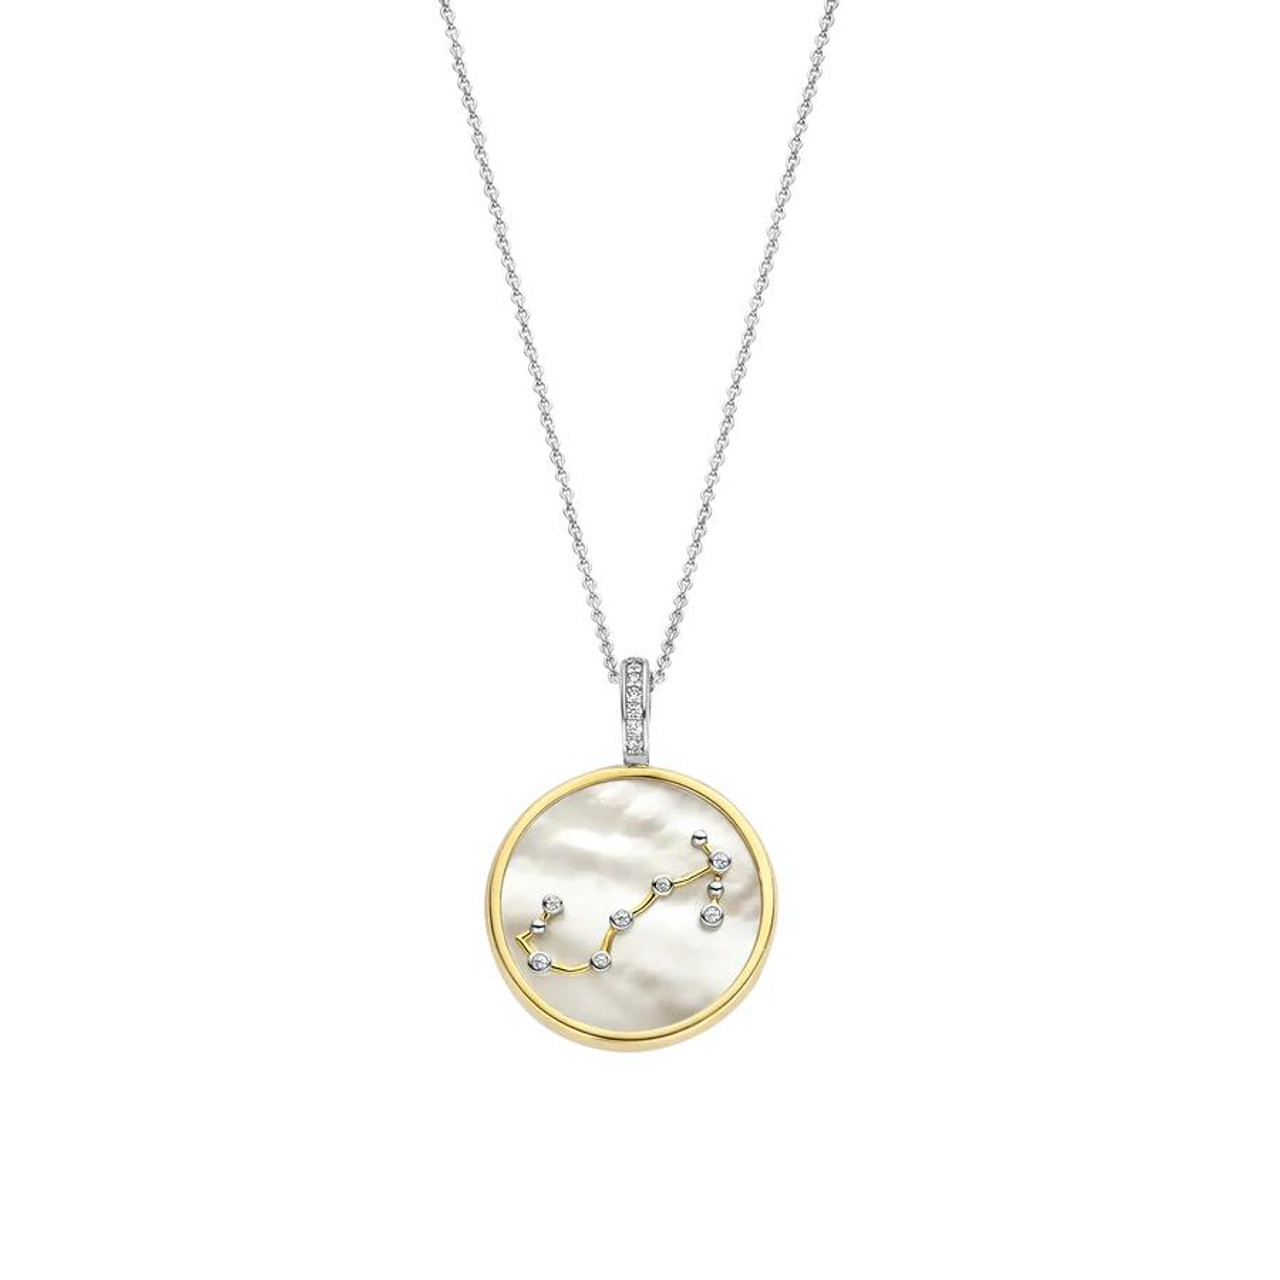 Top 4 Scorpio Zodiac Sign Necklaces You Will Love | Classy Women Collection